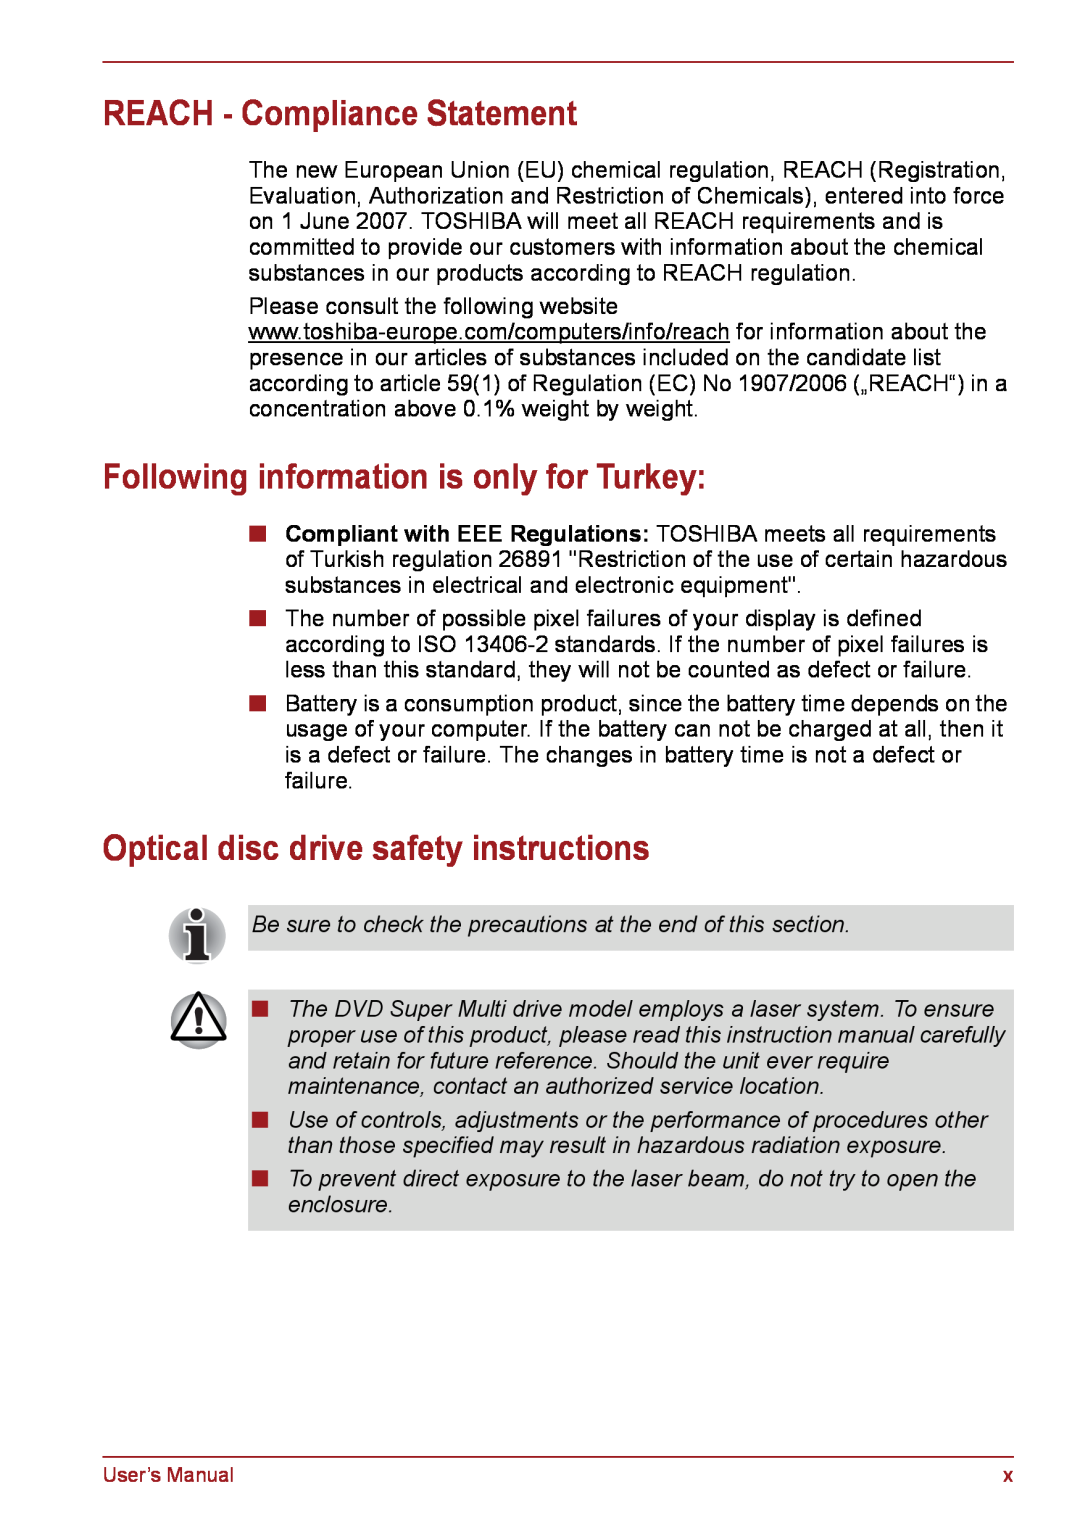 Toshiba PSC08U-02D01D user manual REACH - Compliance Statement, Following information is only for Turkey 